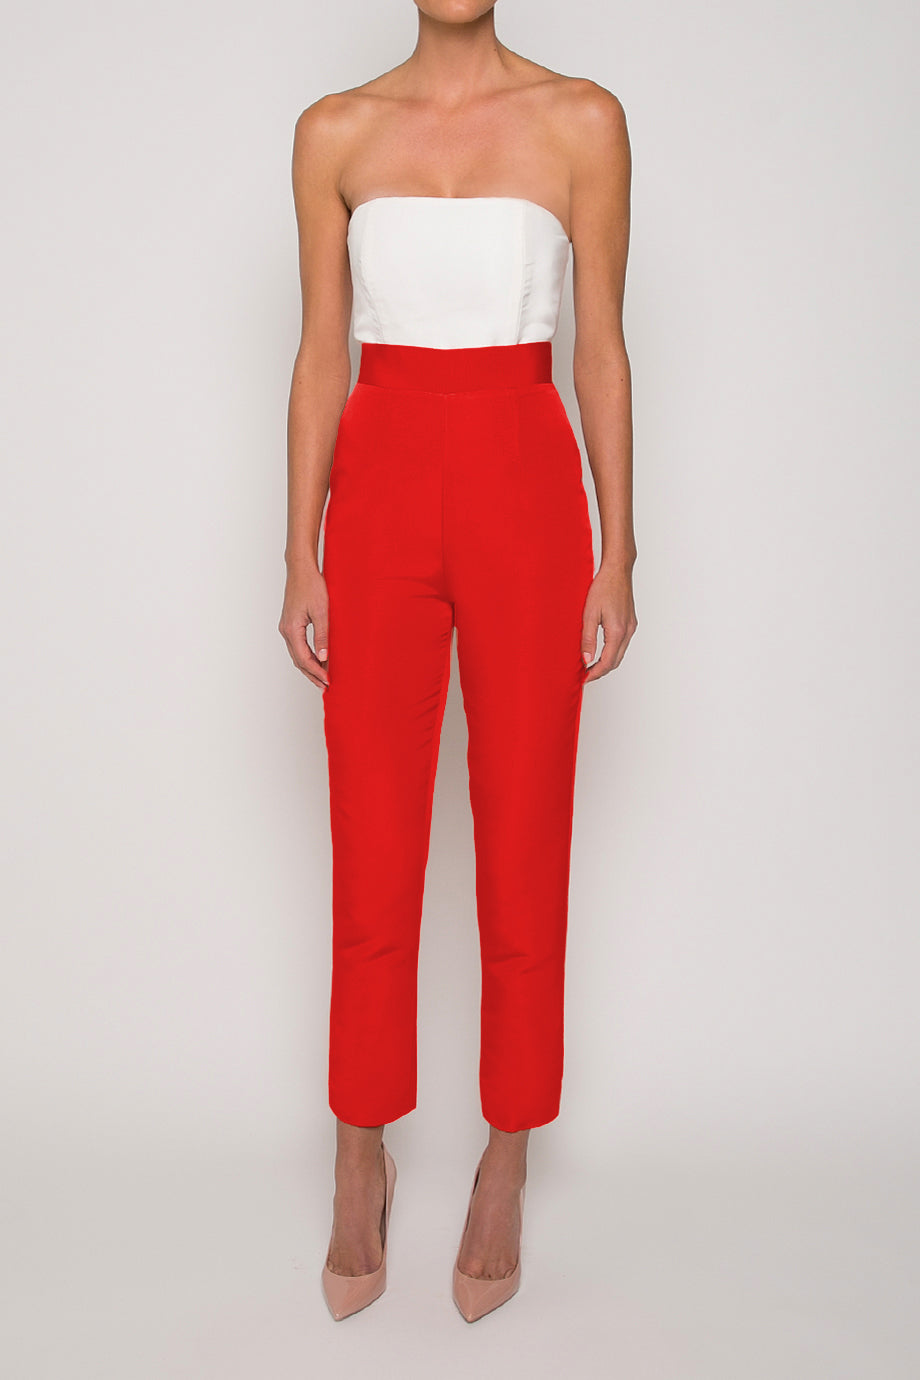 Red Women's Cigarette Pant at Rs 170/piece